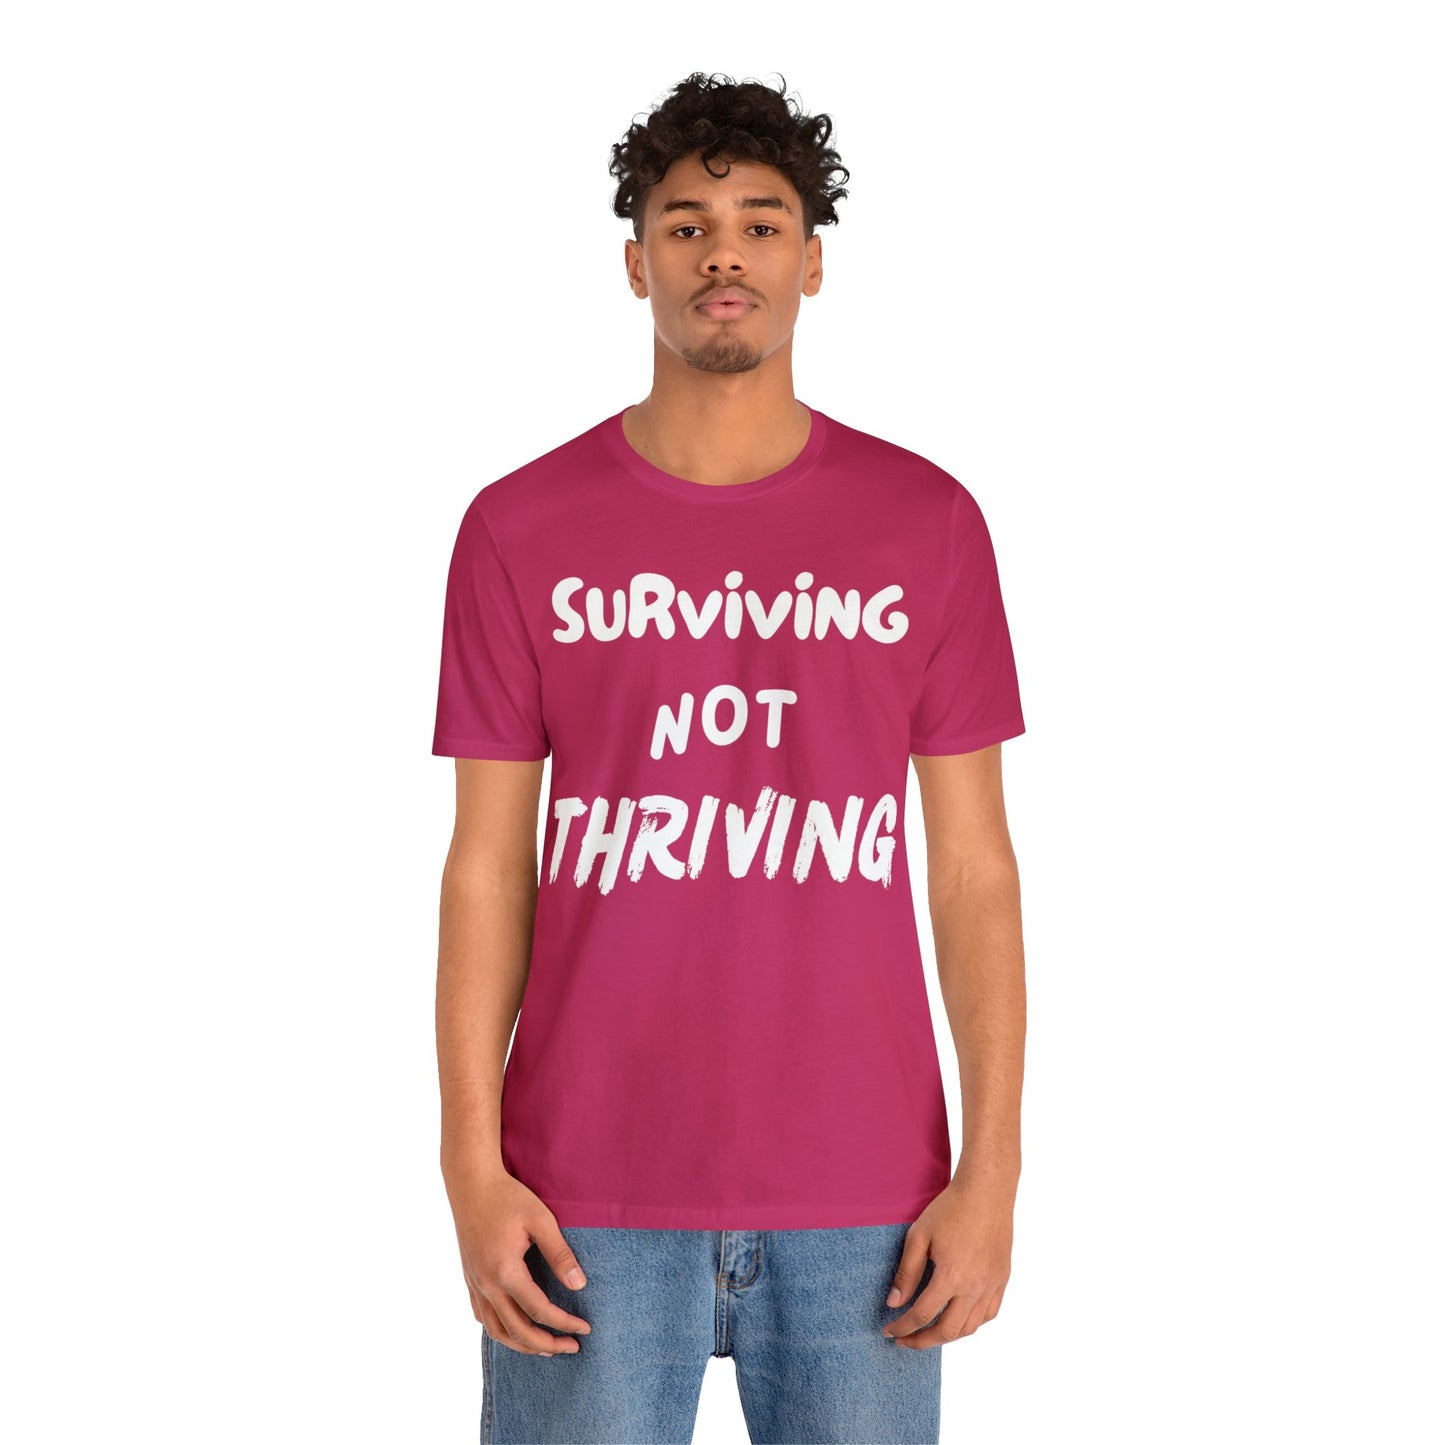 Surviving NOT Thriving w/White writing - Unisex Jersey Short Sleeve Tee